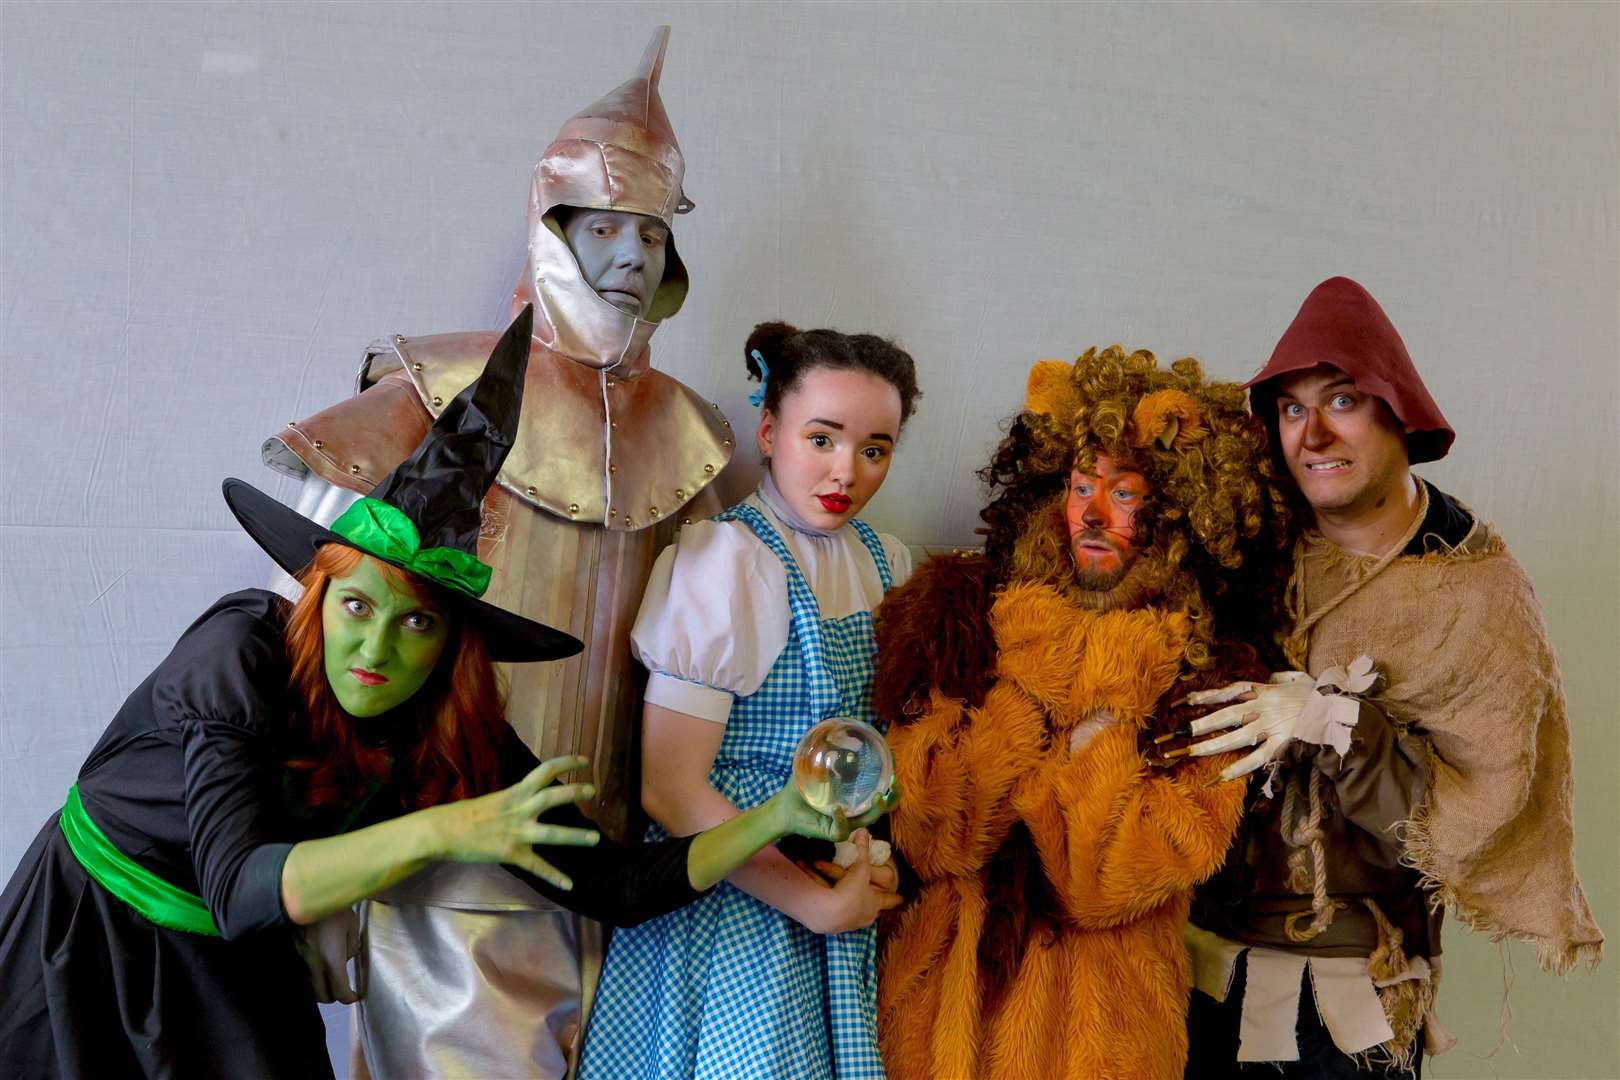 Catch the cast of the Wizard of Oz up until Sunday